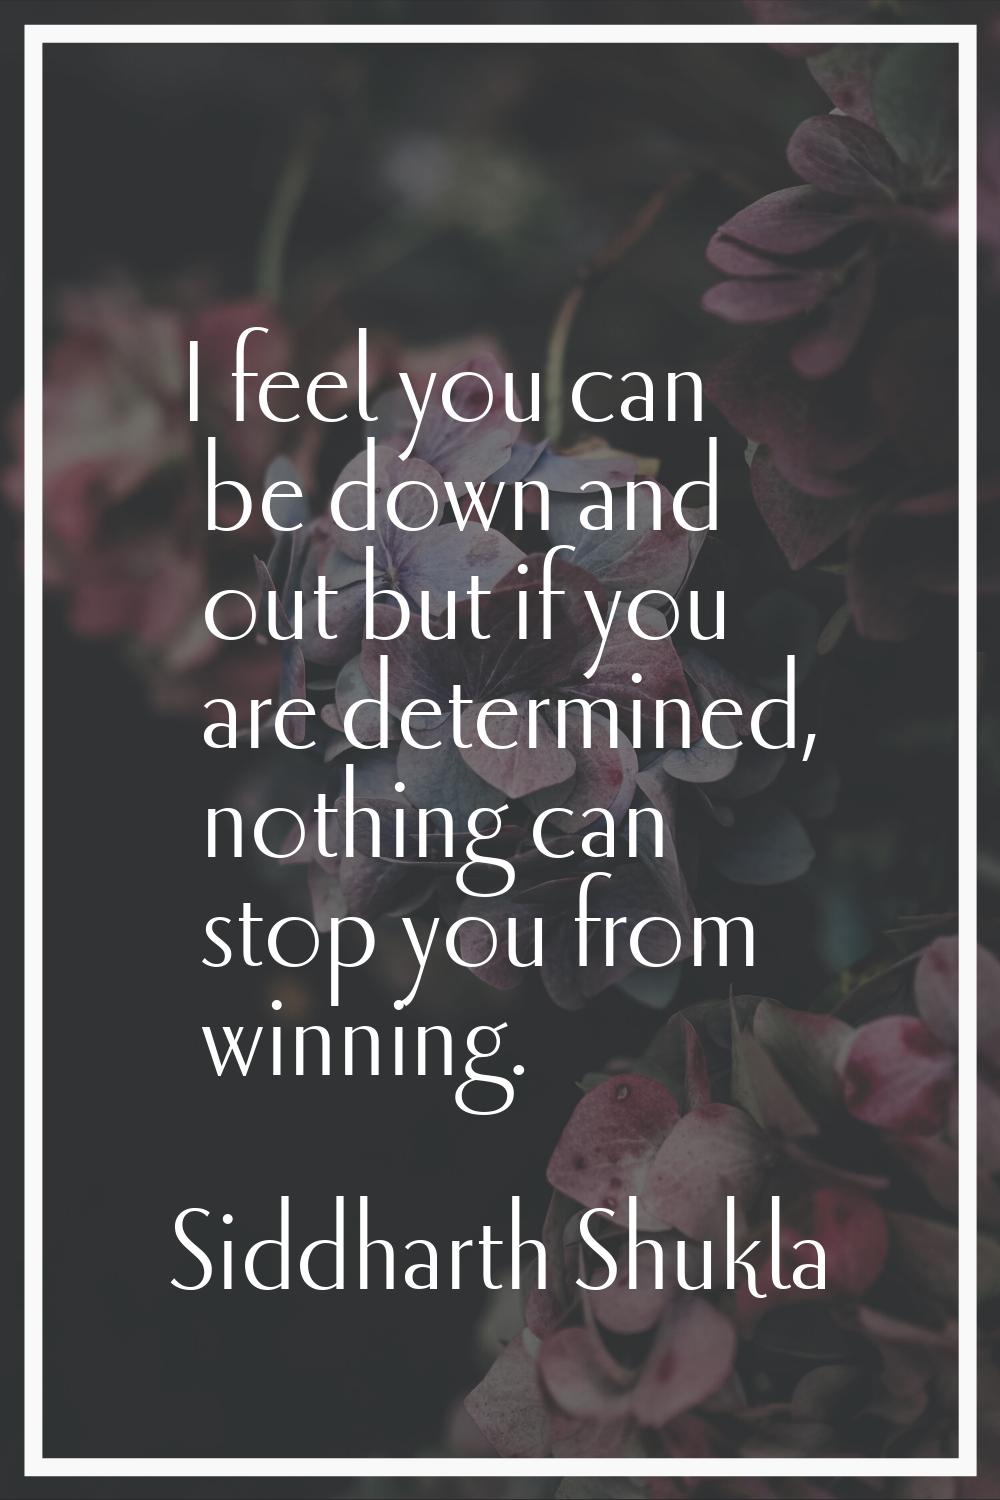 I feel you can be down and out but if you are determined, nothing can stop you from winning.